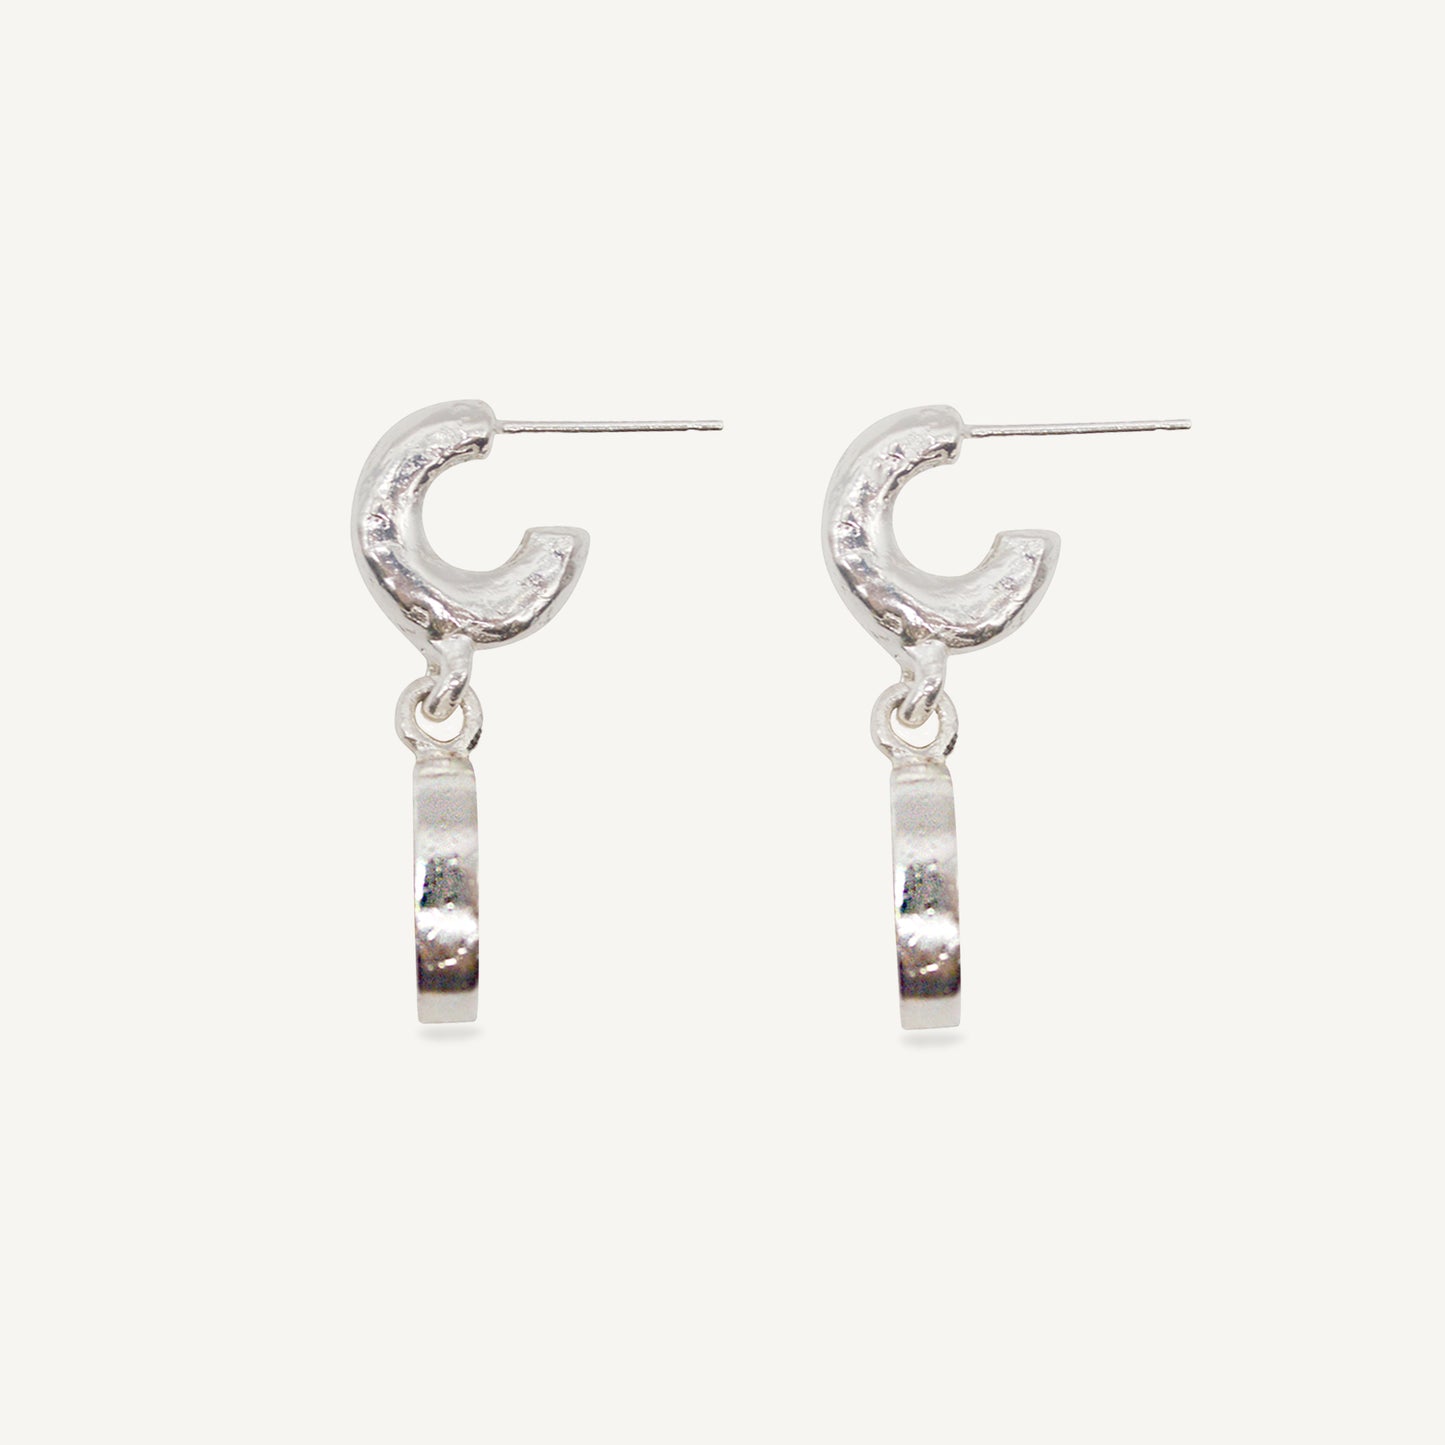 Sculptural statement silver hoop earrings handcrafted by Folde Jewellery in London ethically handmade using recycled silver and highland horn.